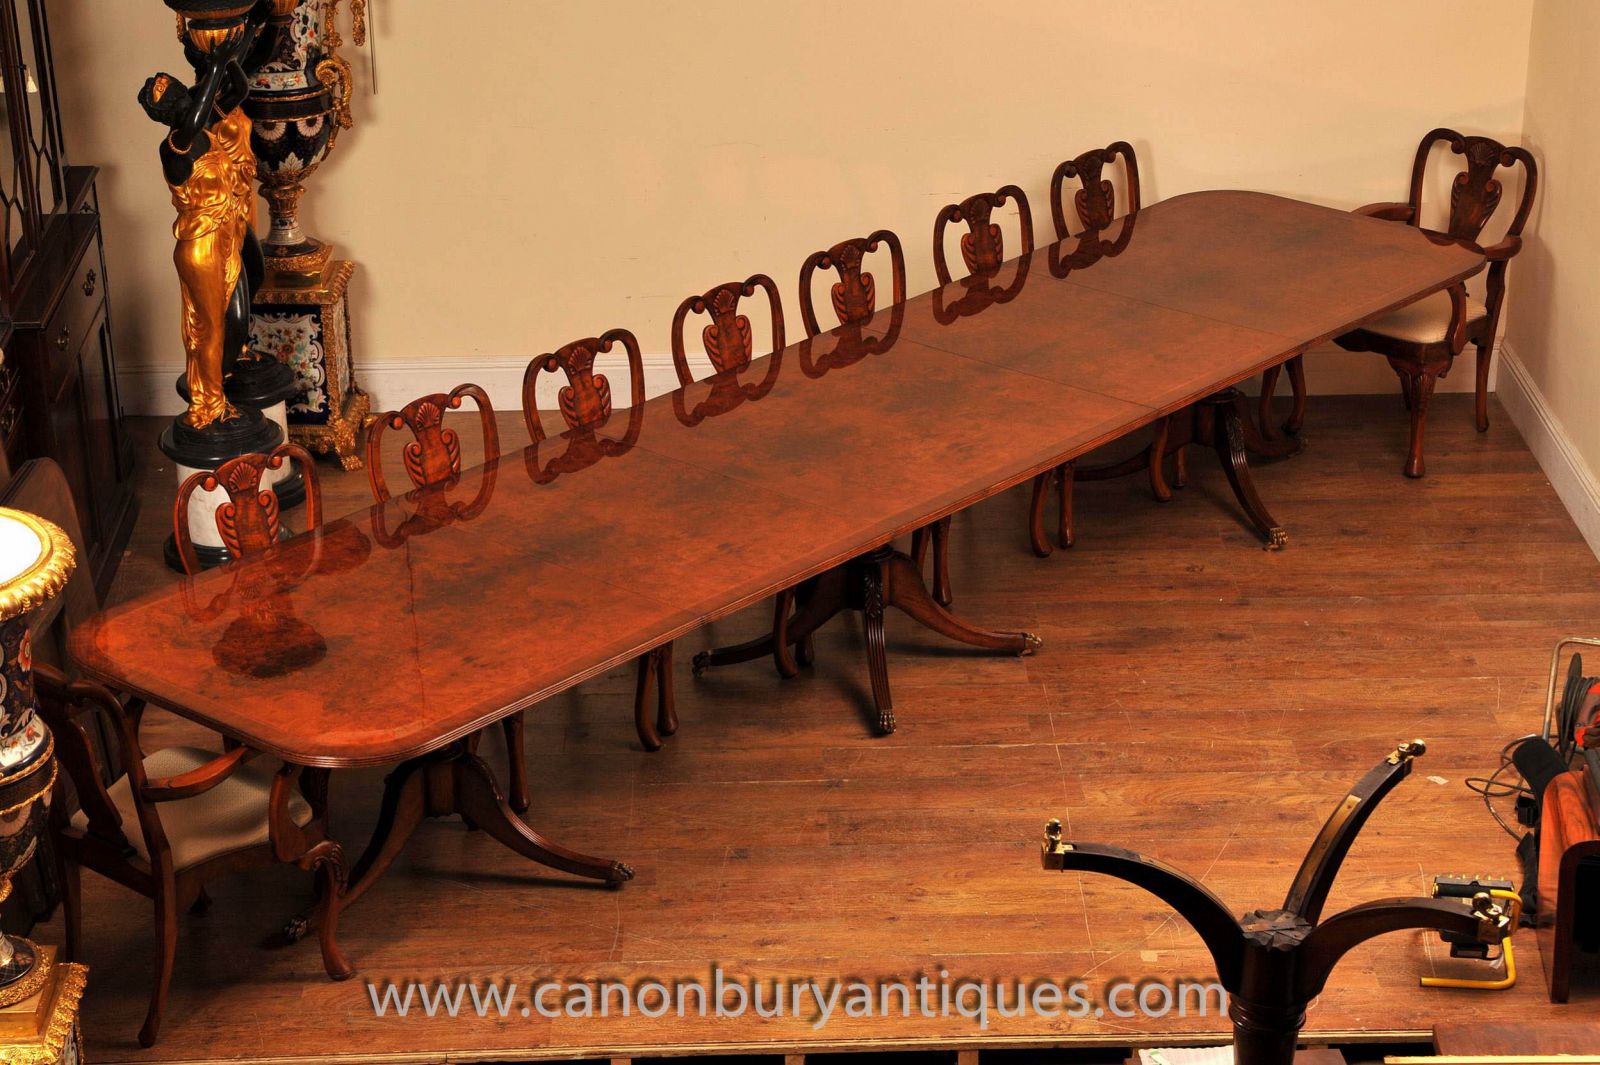 Extending Regency tables - how big do you want to go?